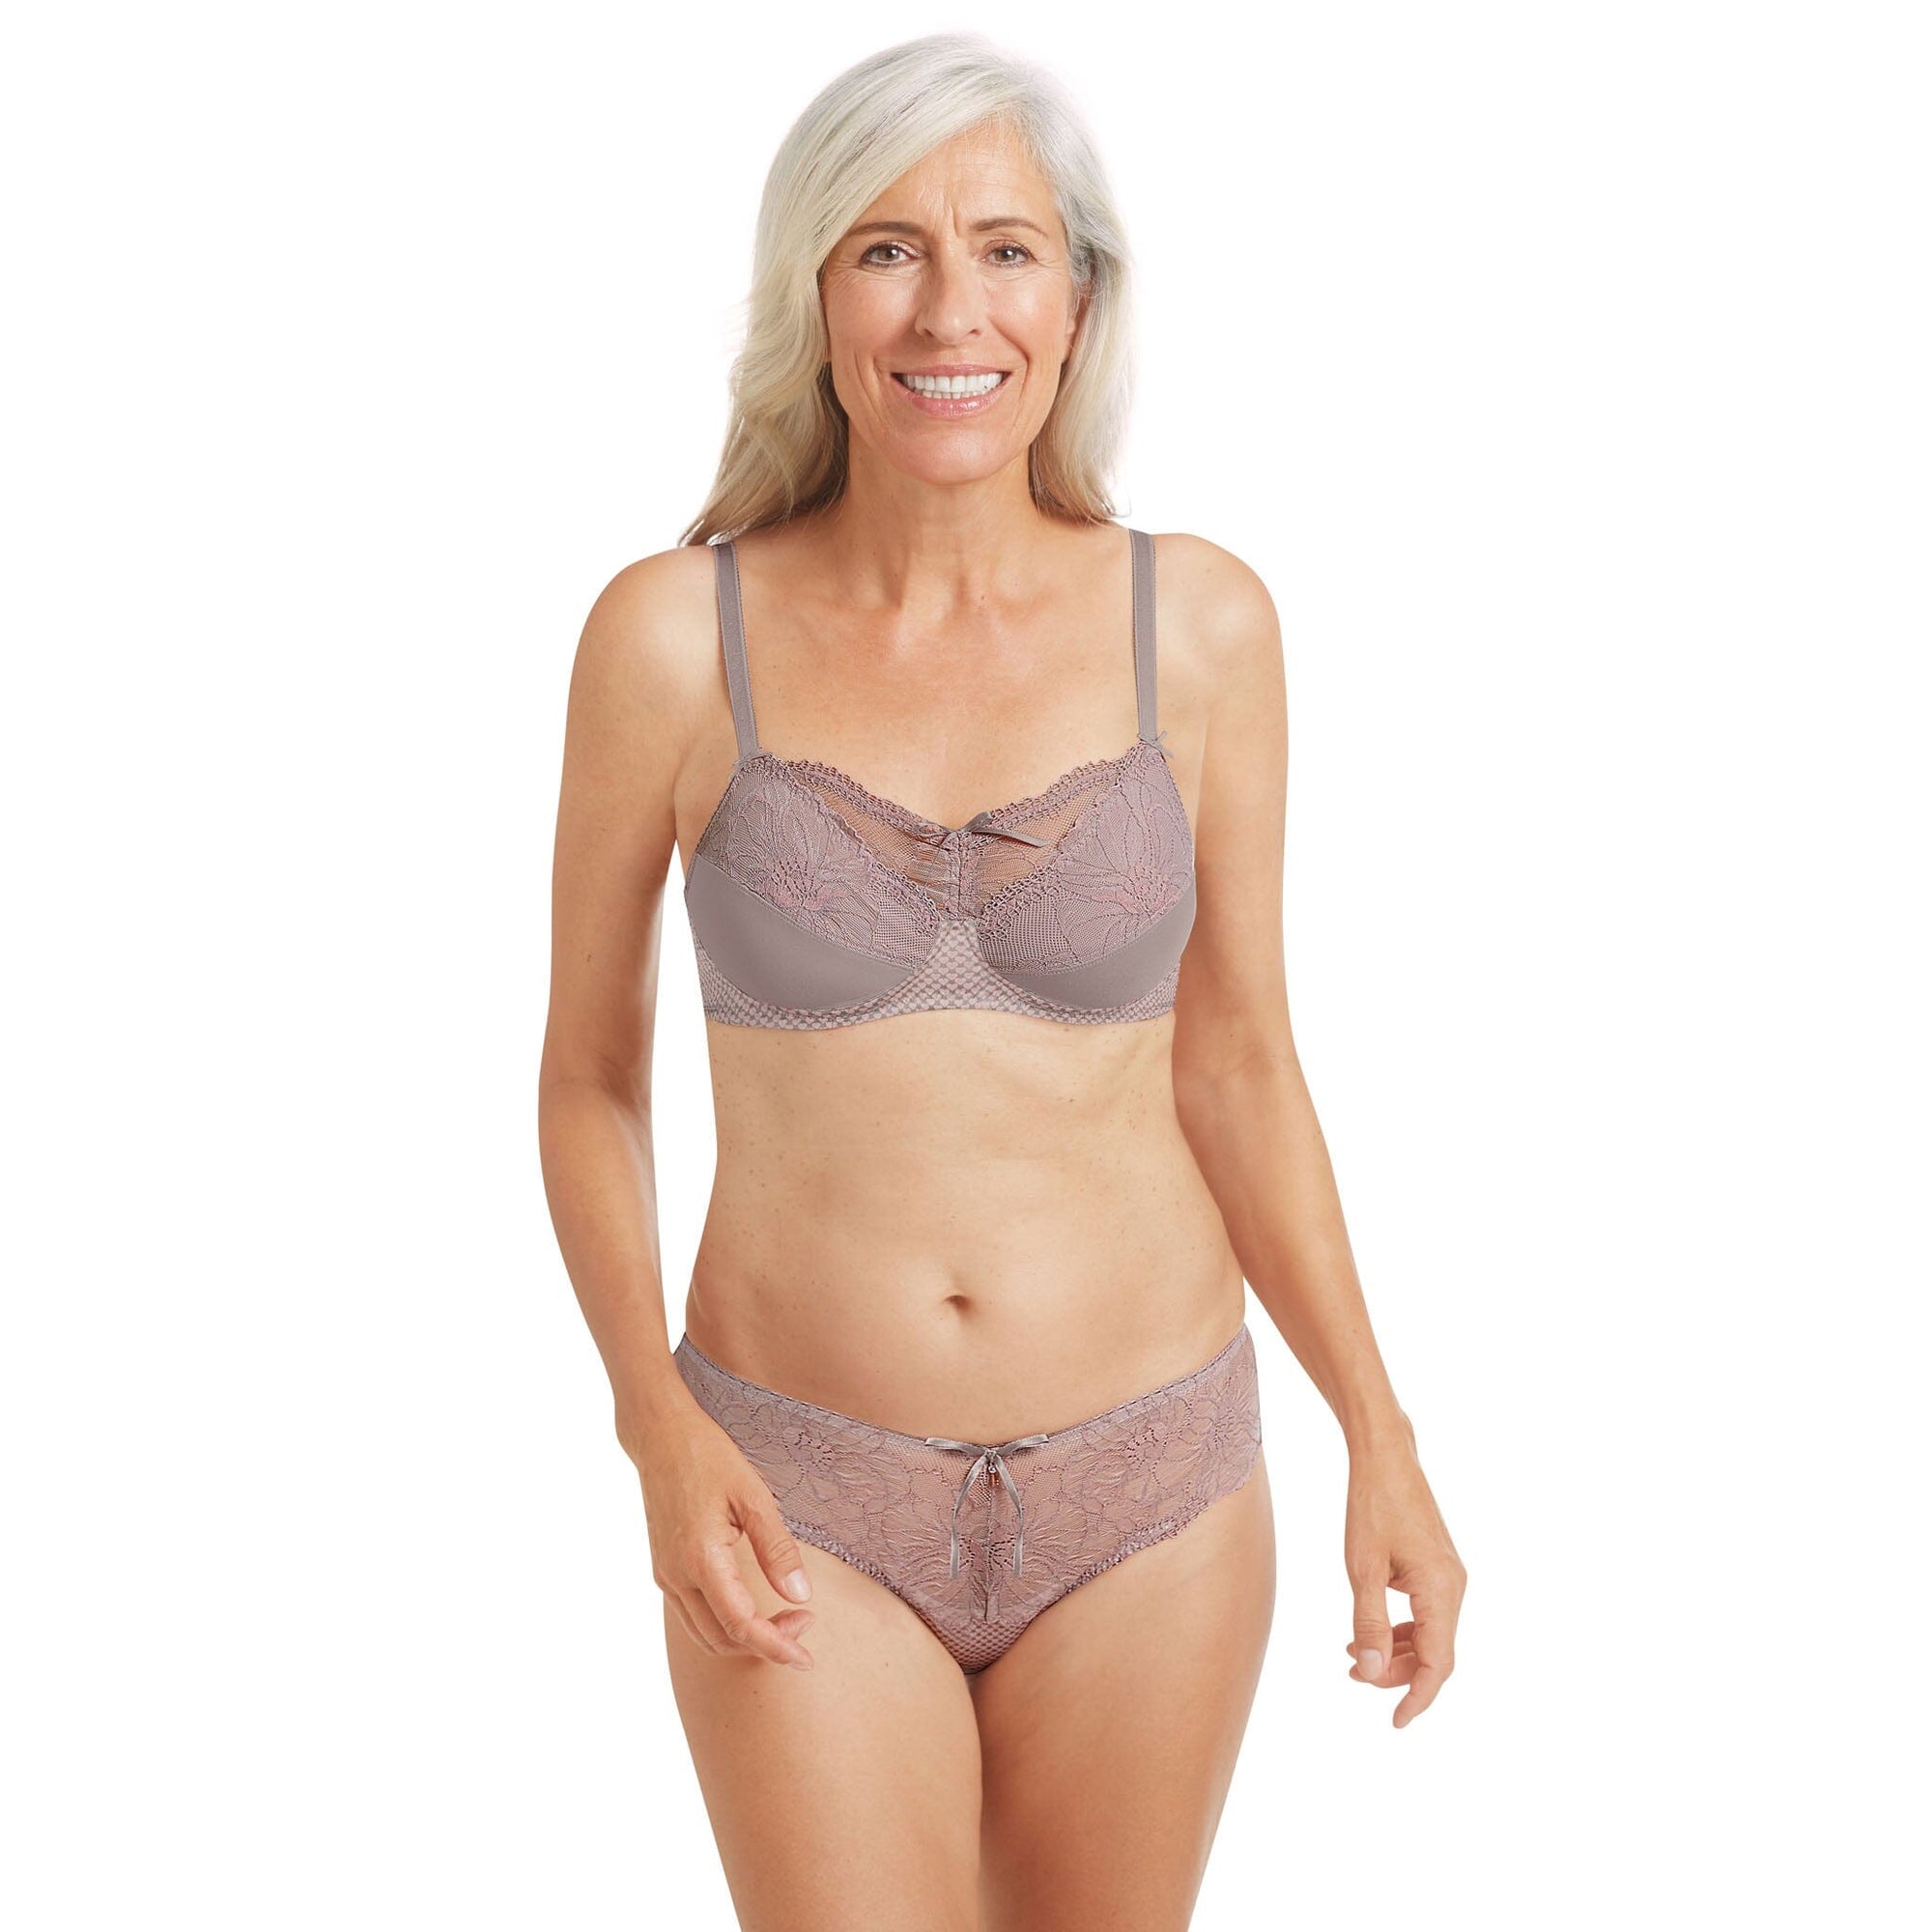 Amoena Be Amazing Wire-Free Bra Shown in Tender Taupe/Rose Kiss-Ribbon Detail